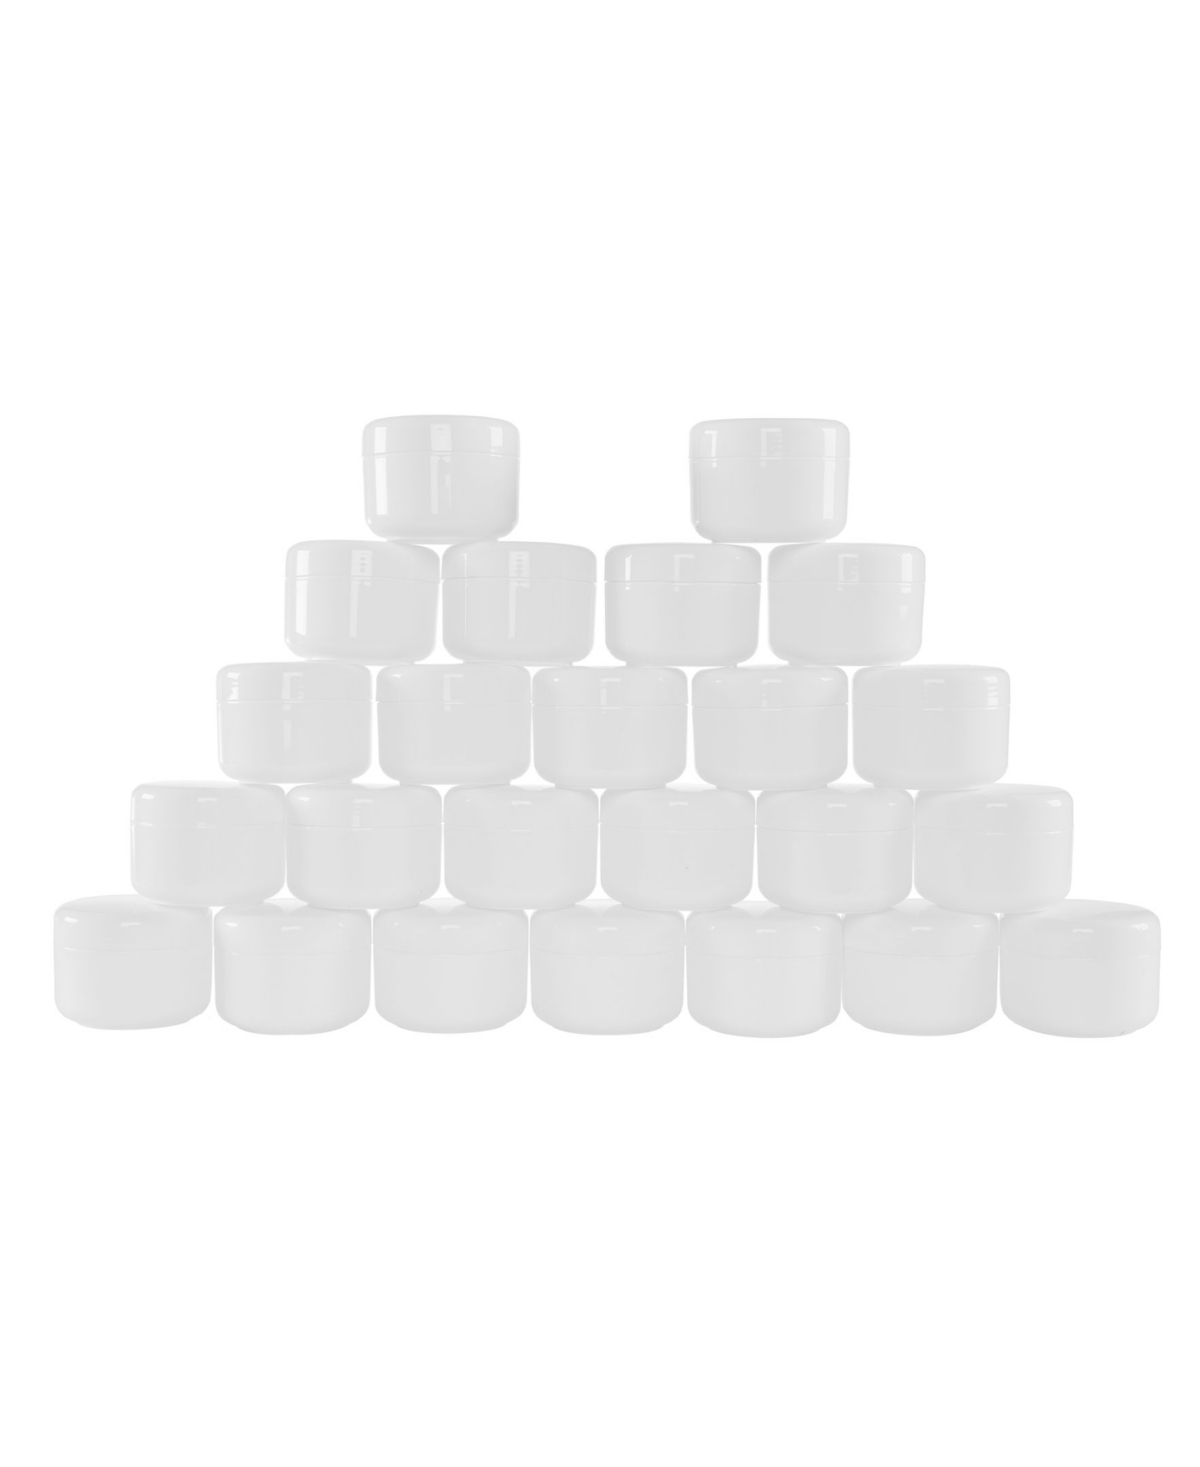 4 Ounce Plastic Jar Containers, 24 Pack of Storage Jars Inner and Outer Lid by Stalwart - White